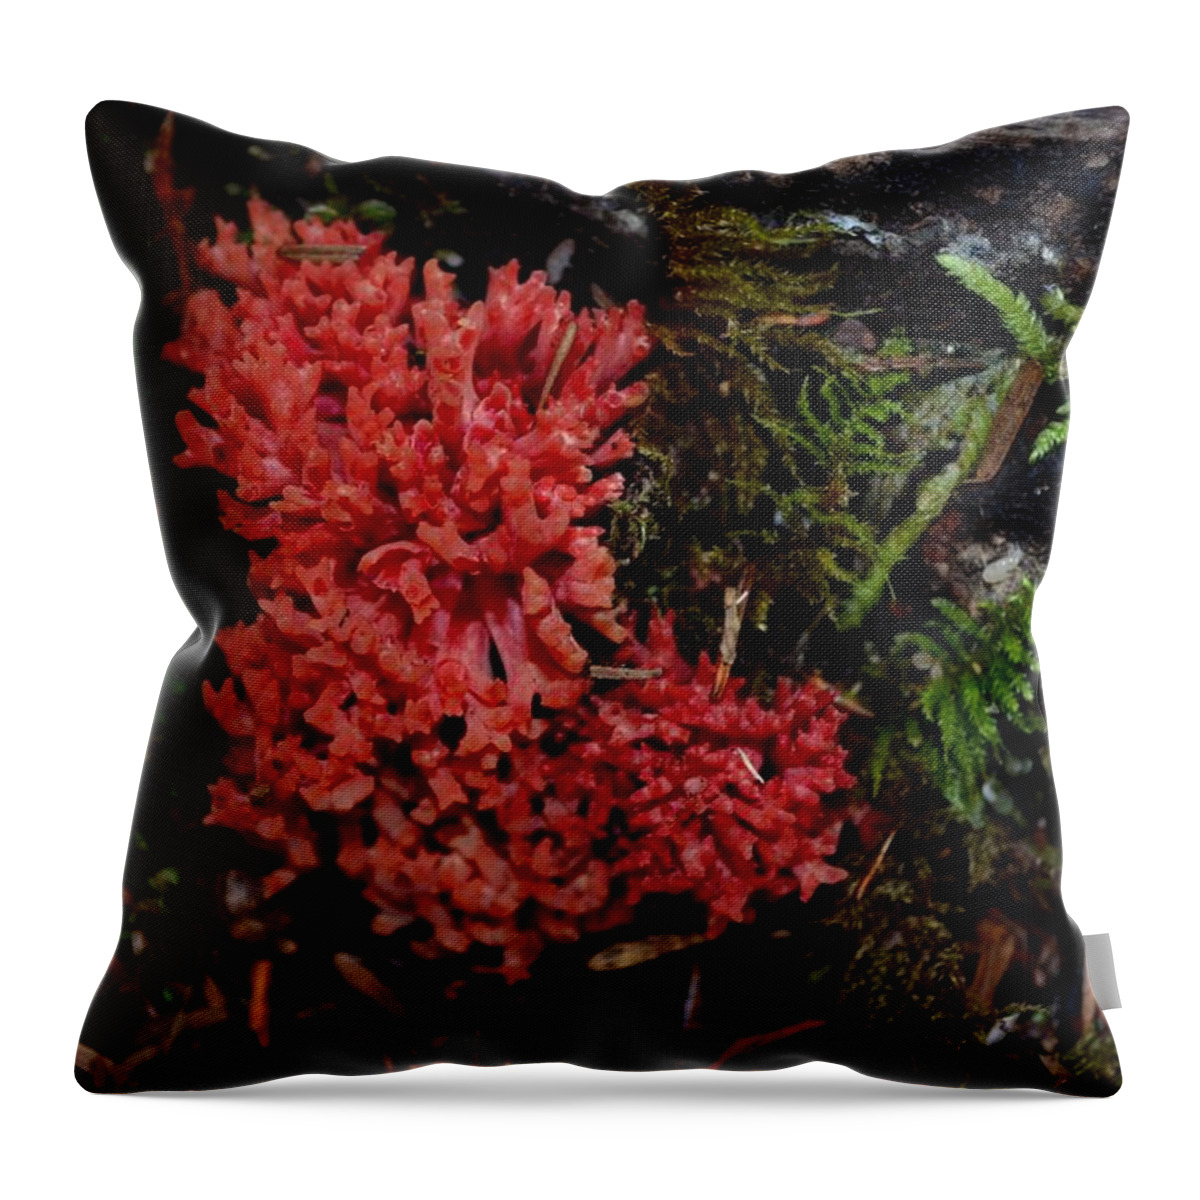 Red Coral Mushroom Throw Pillow featuring the photograph Red Coral Mushroom by Laureen Murtha Menzl